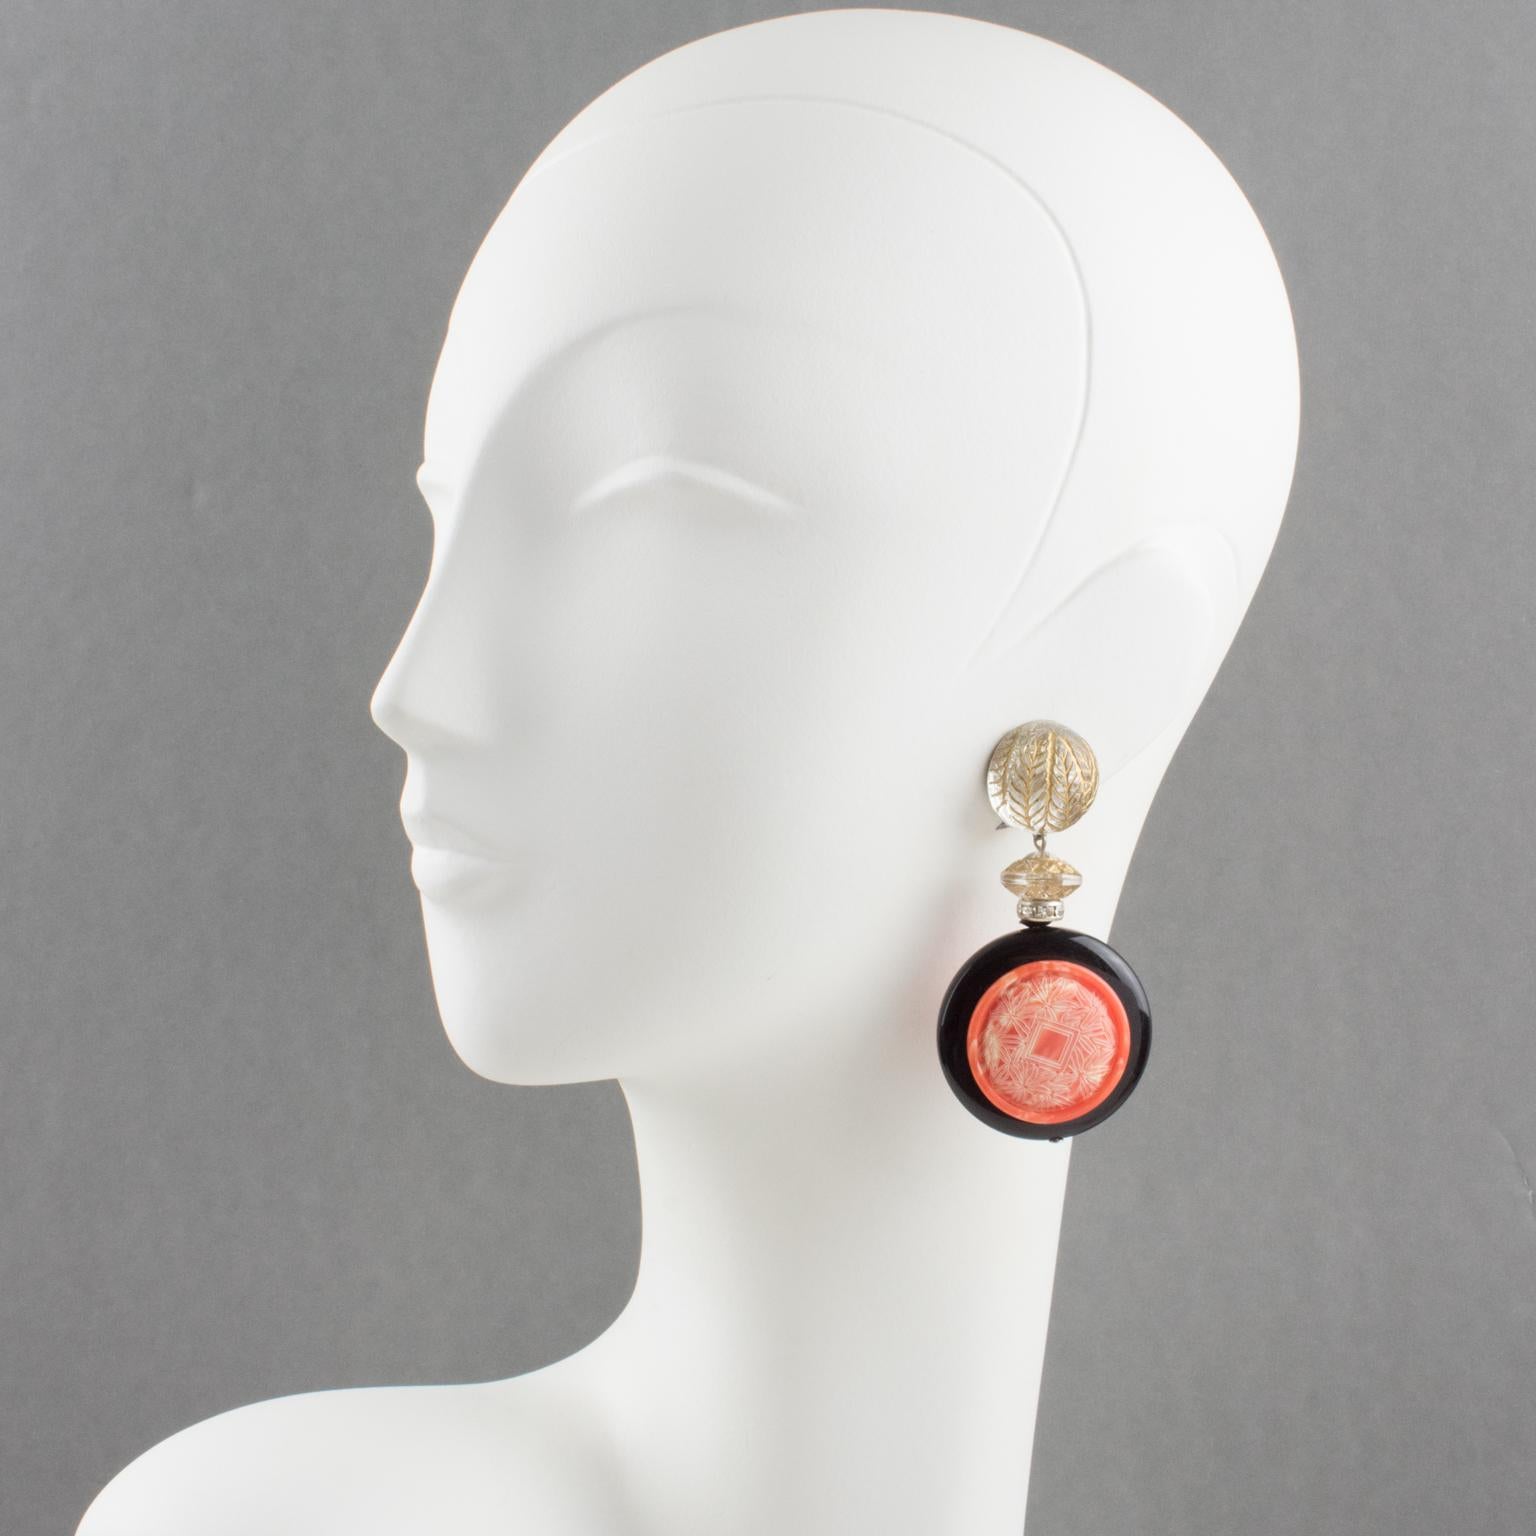 Sophisticated Angela Caputi, made in Italy resin clip-on earrings. Oversized dangling shape with dimensional black color disk topped with faux coral medallion with Asian-inspired carving. The design is contrasted with crystal clear carved beads and